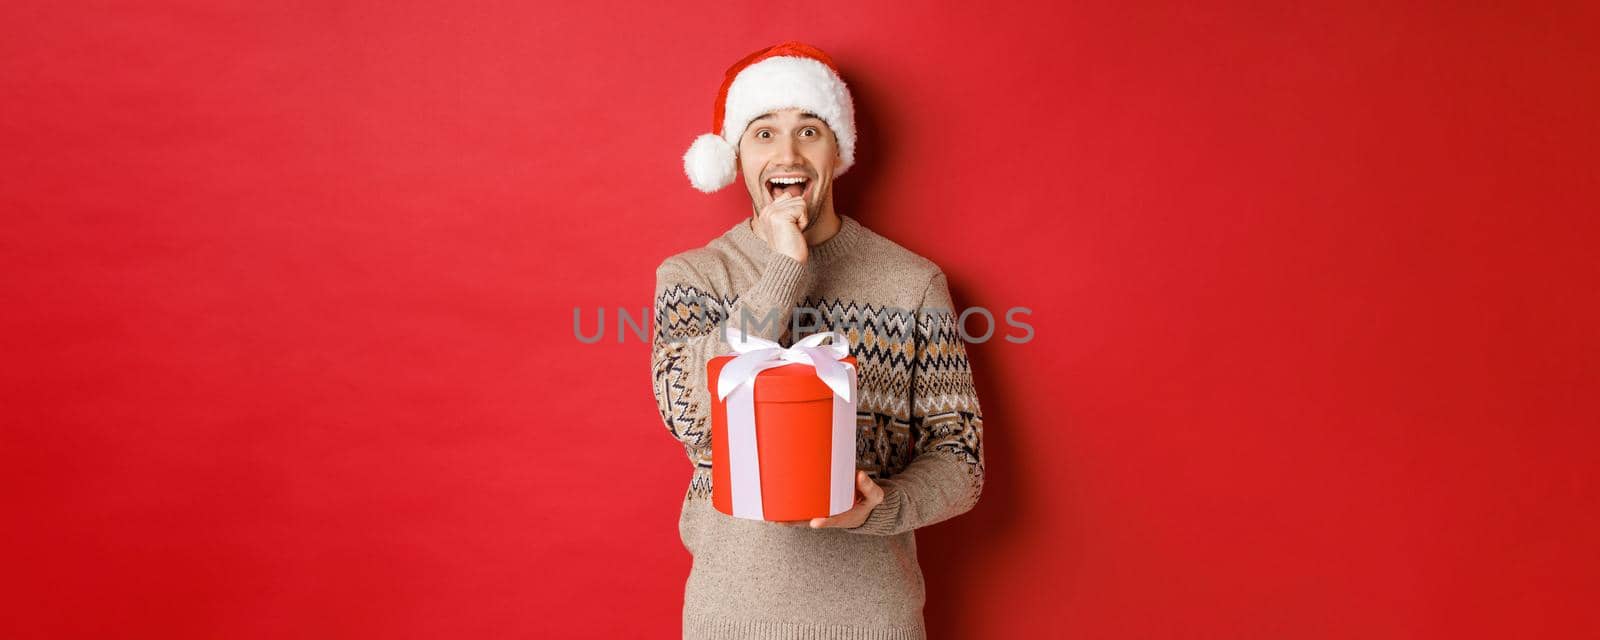 Image of handsome guy in santa hat and christmas sweater, excited to open xmas gift, looking amazed and holding present in one hand, standing over red background.